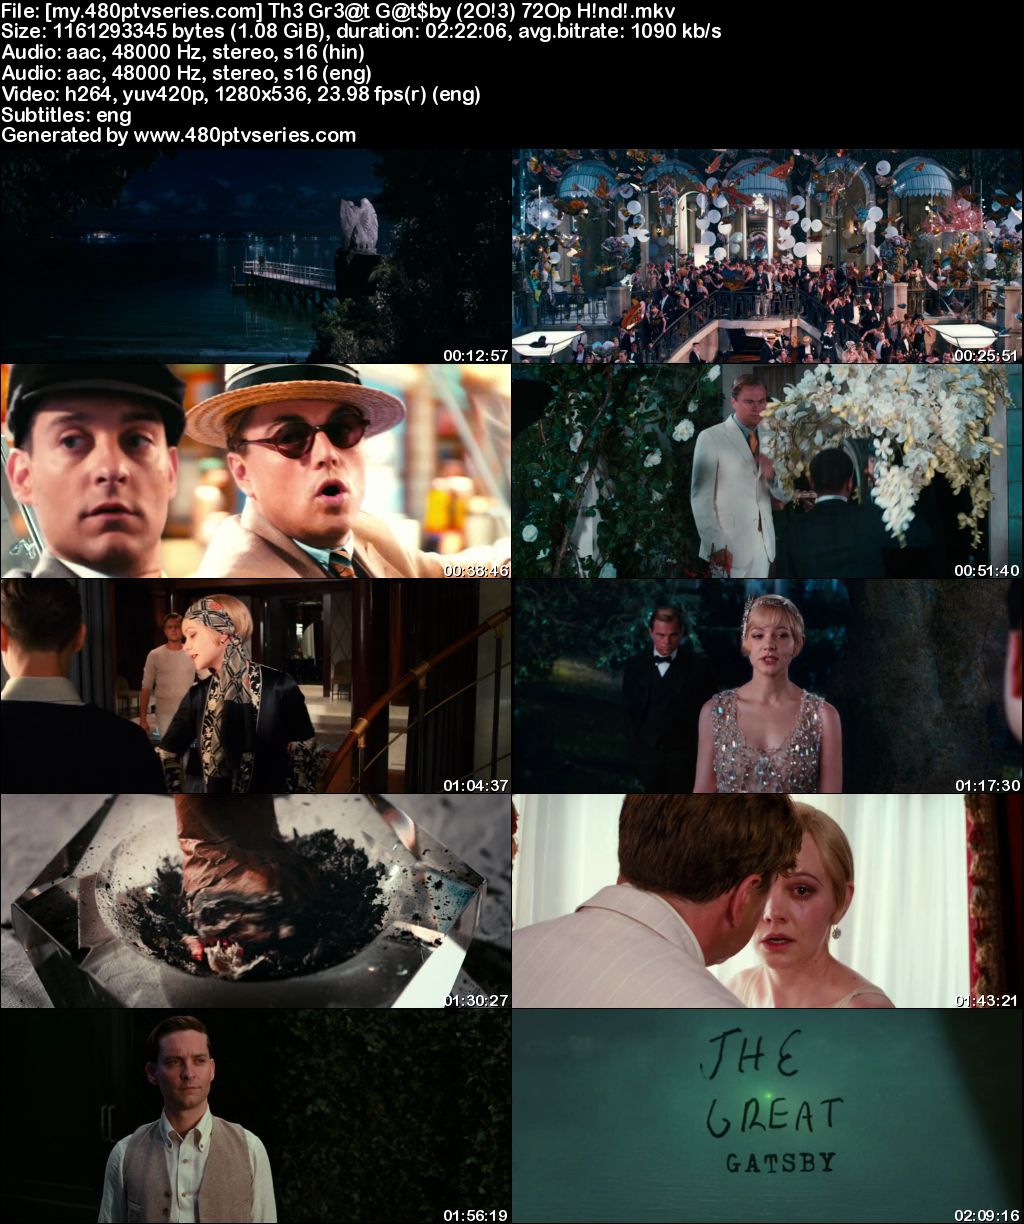 Watch Online Free The Great Gatsby (2013) Full Hindi Dual Audio Movie Download 480p 720p Bluray